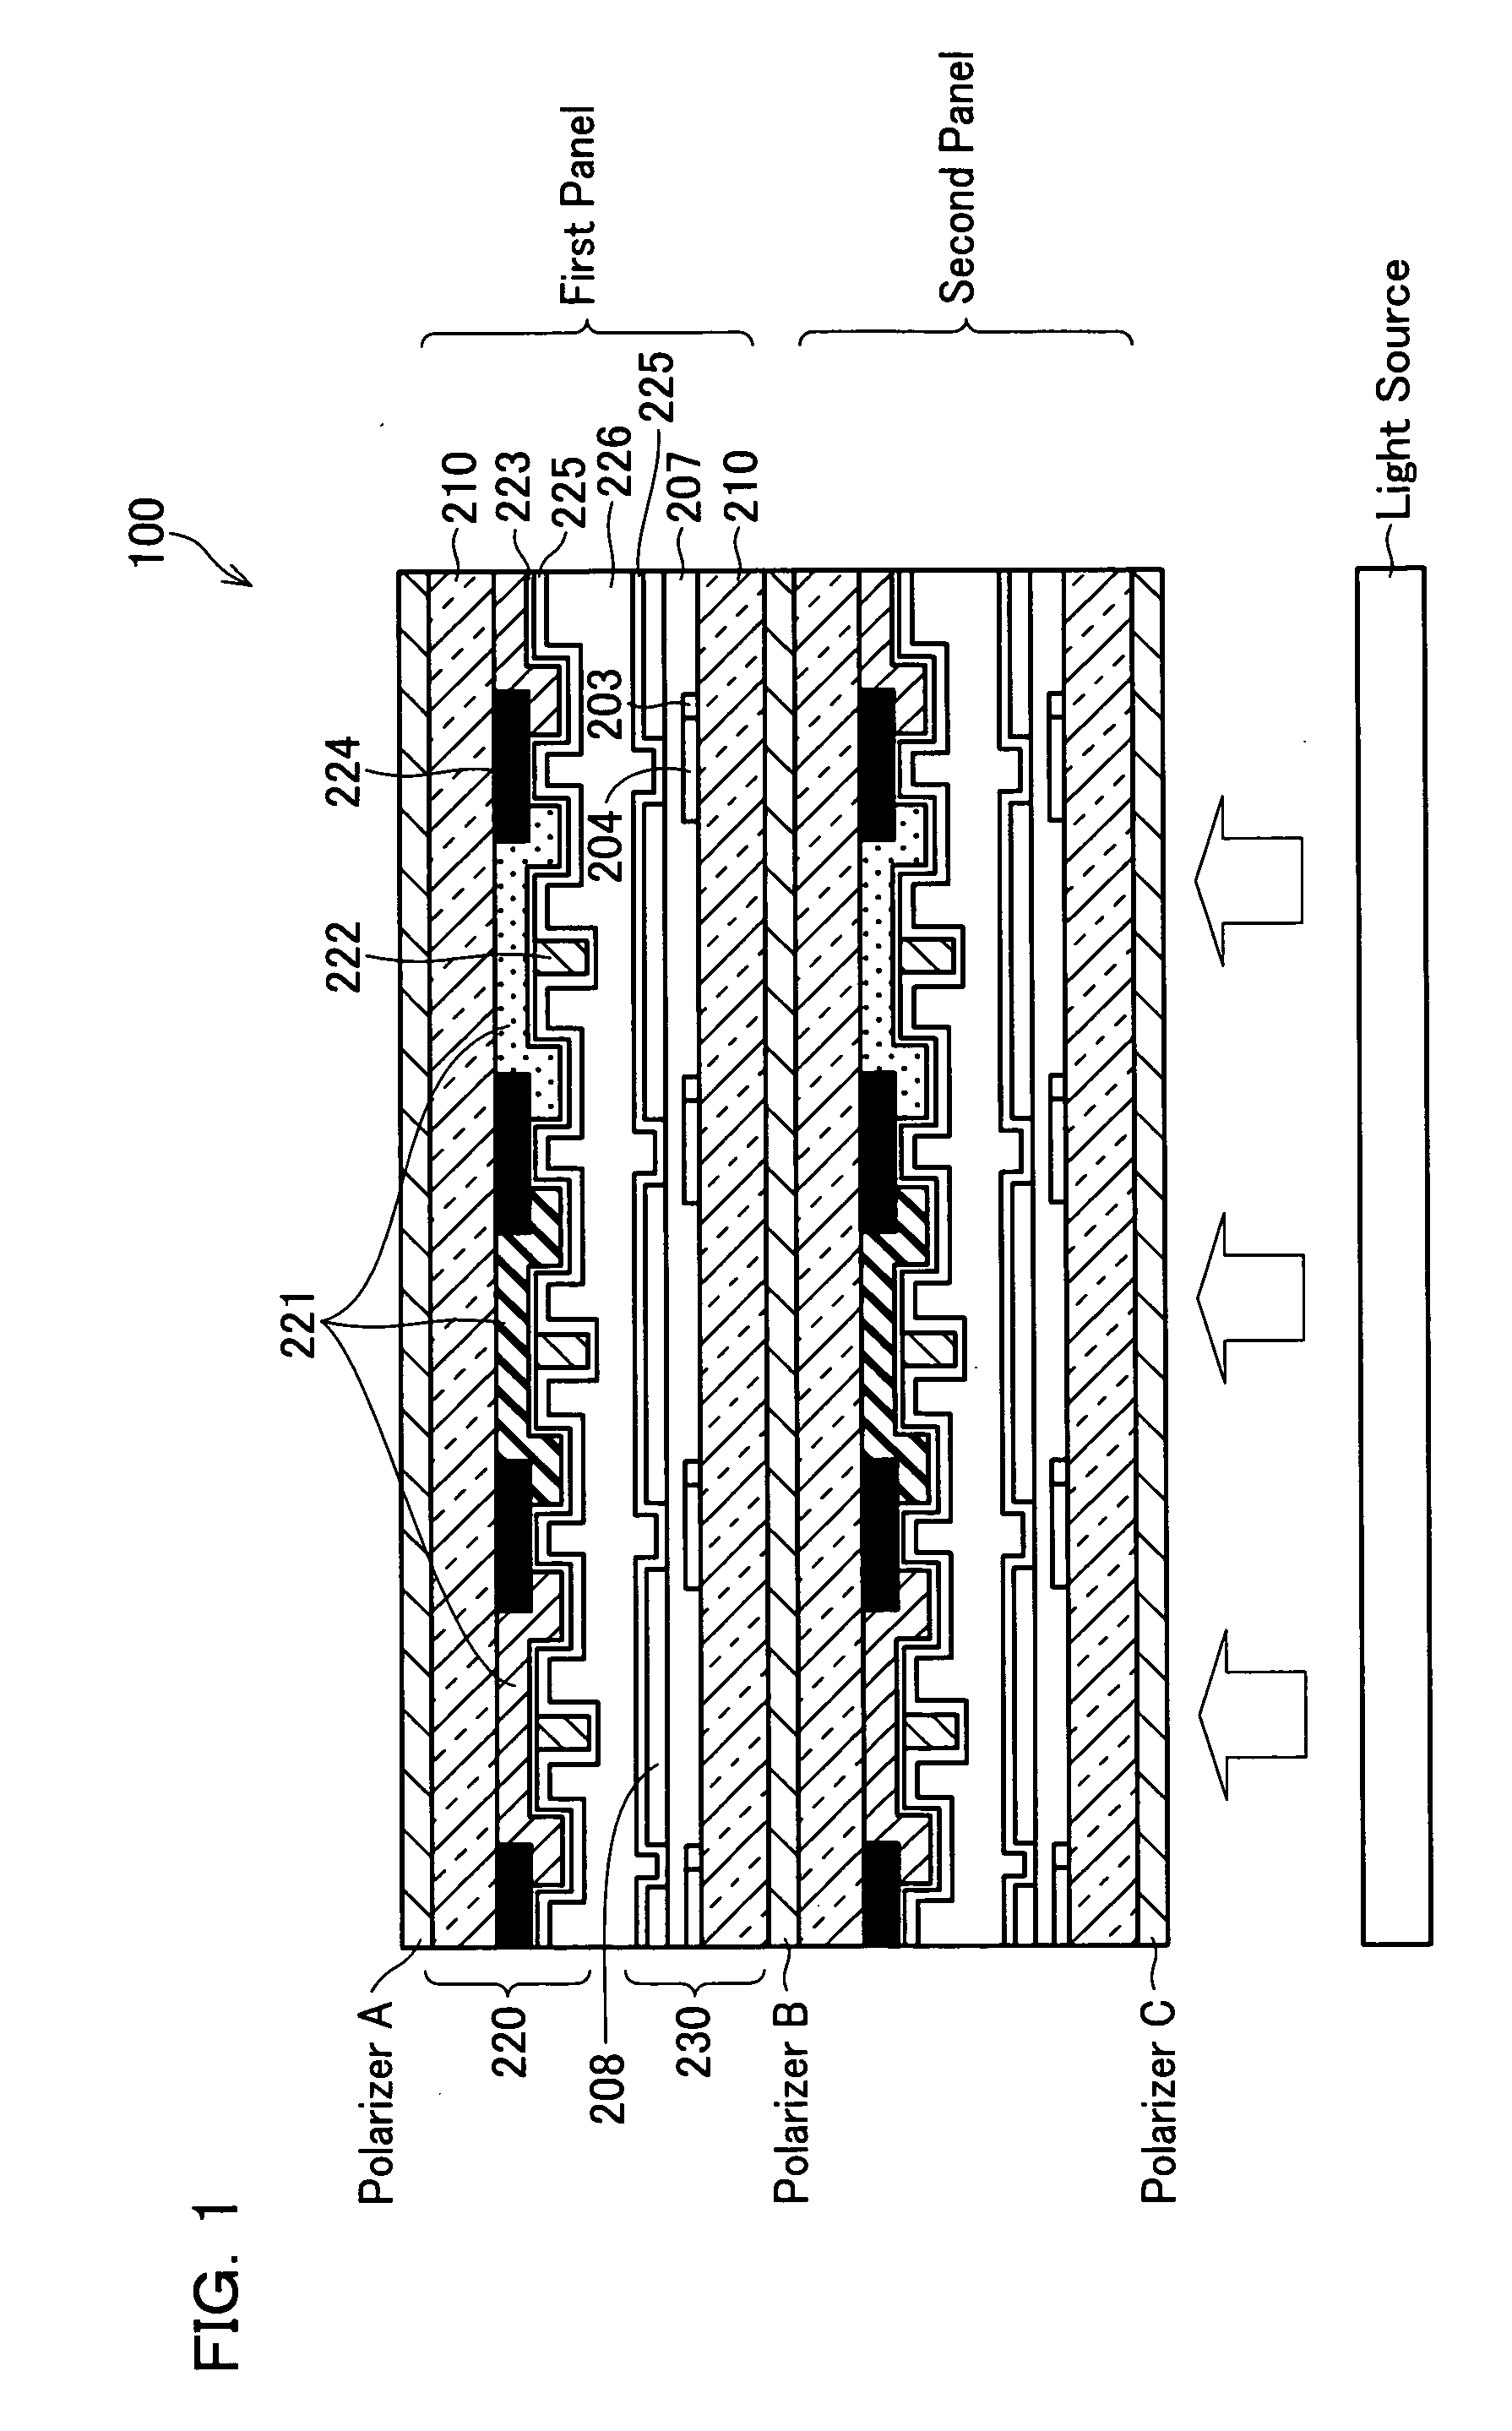 Liquid Crystal Display and Television Receiver